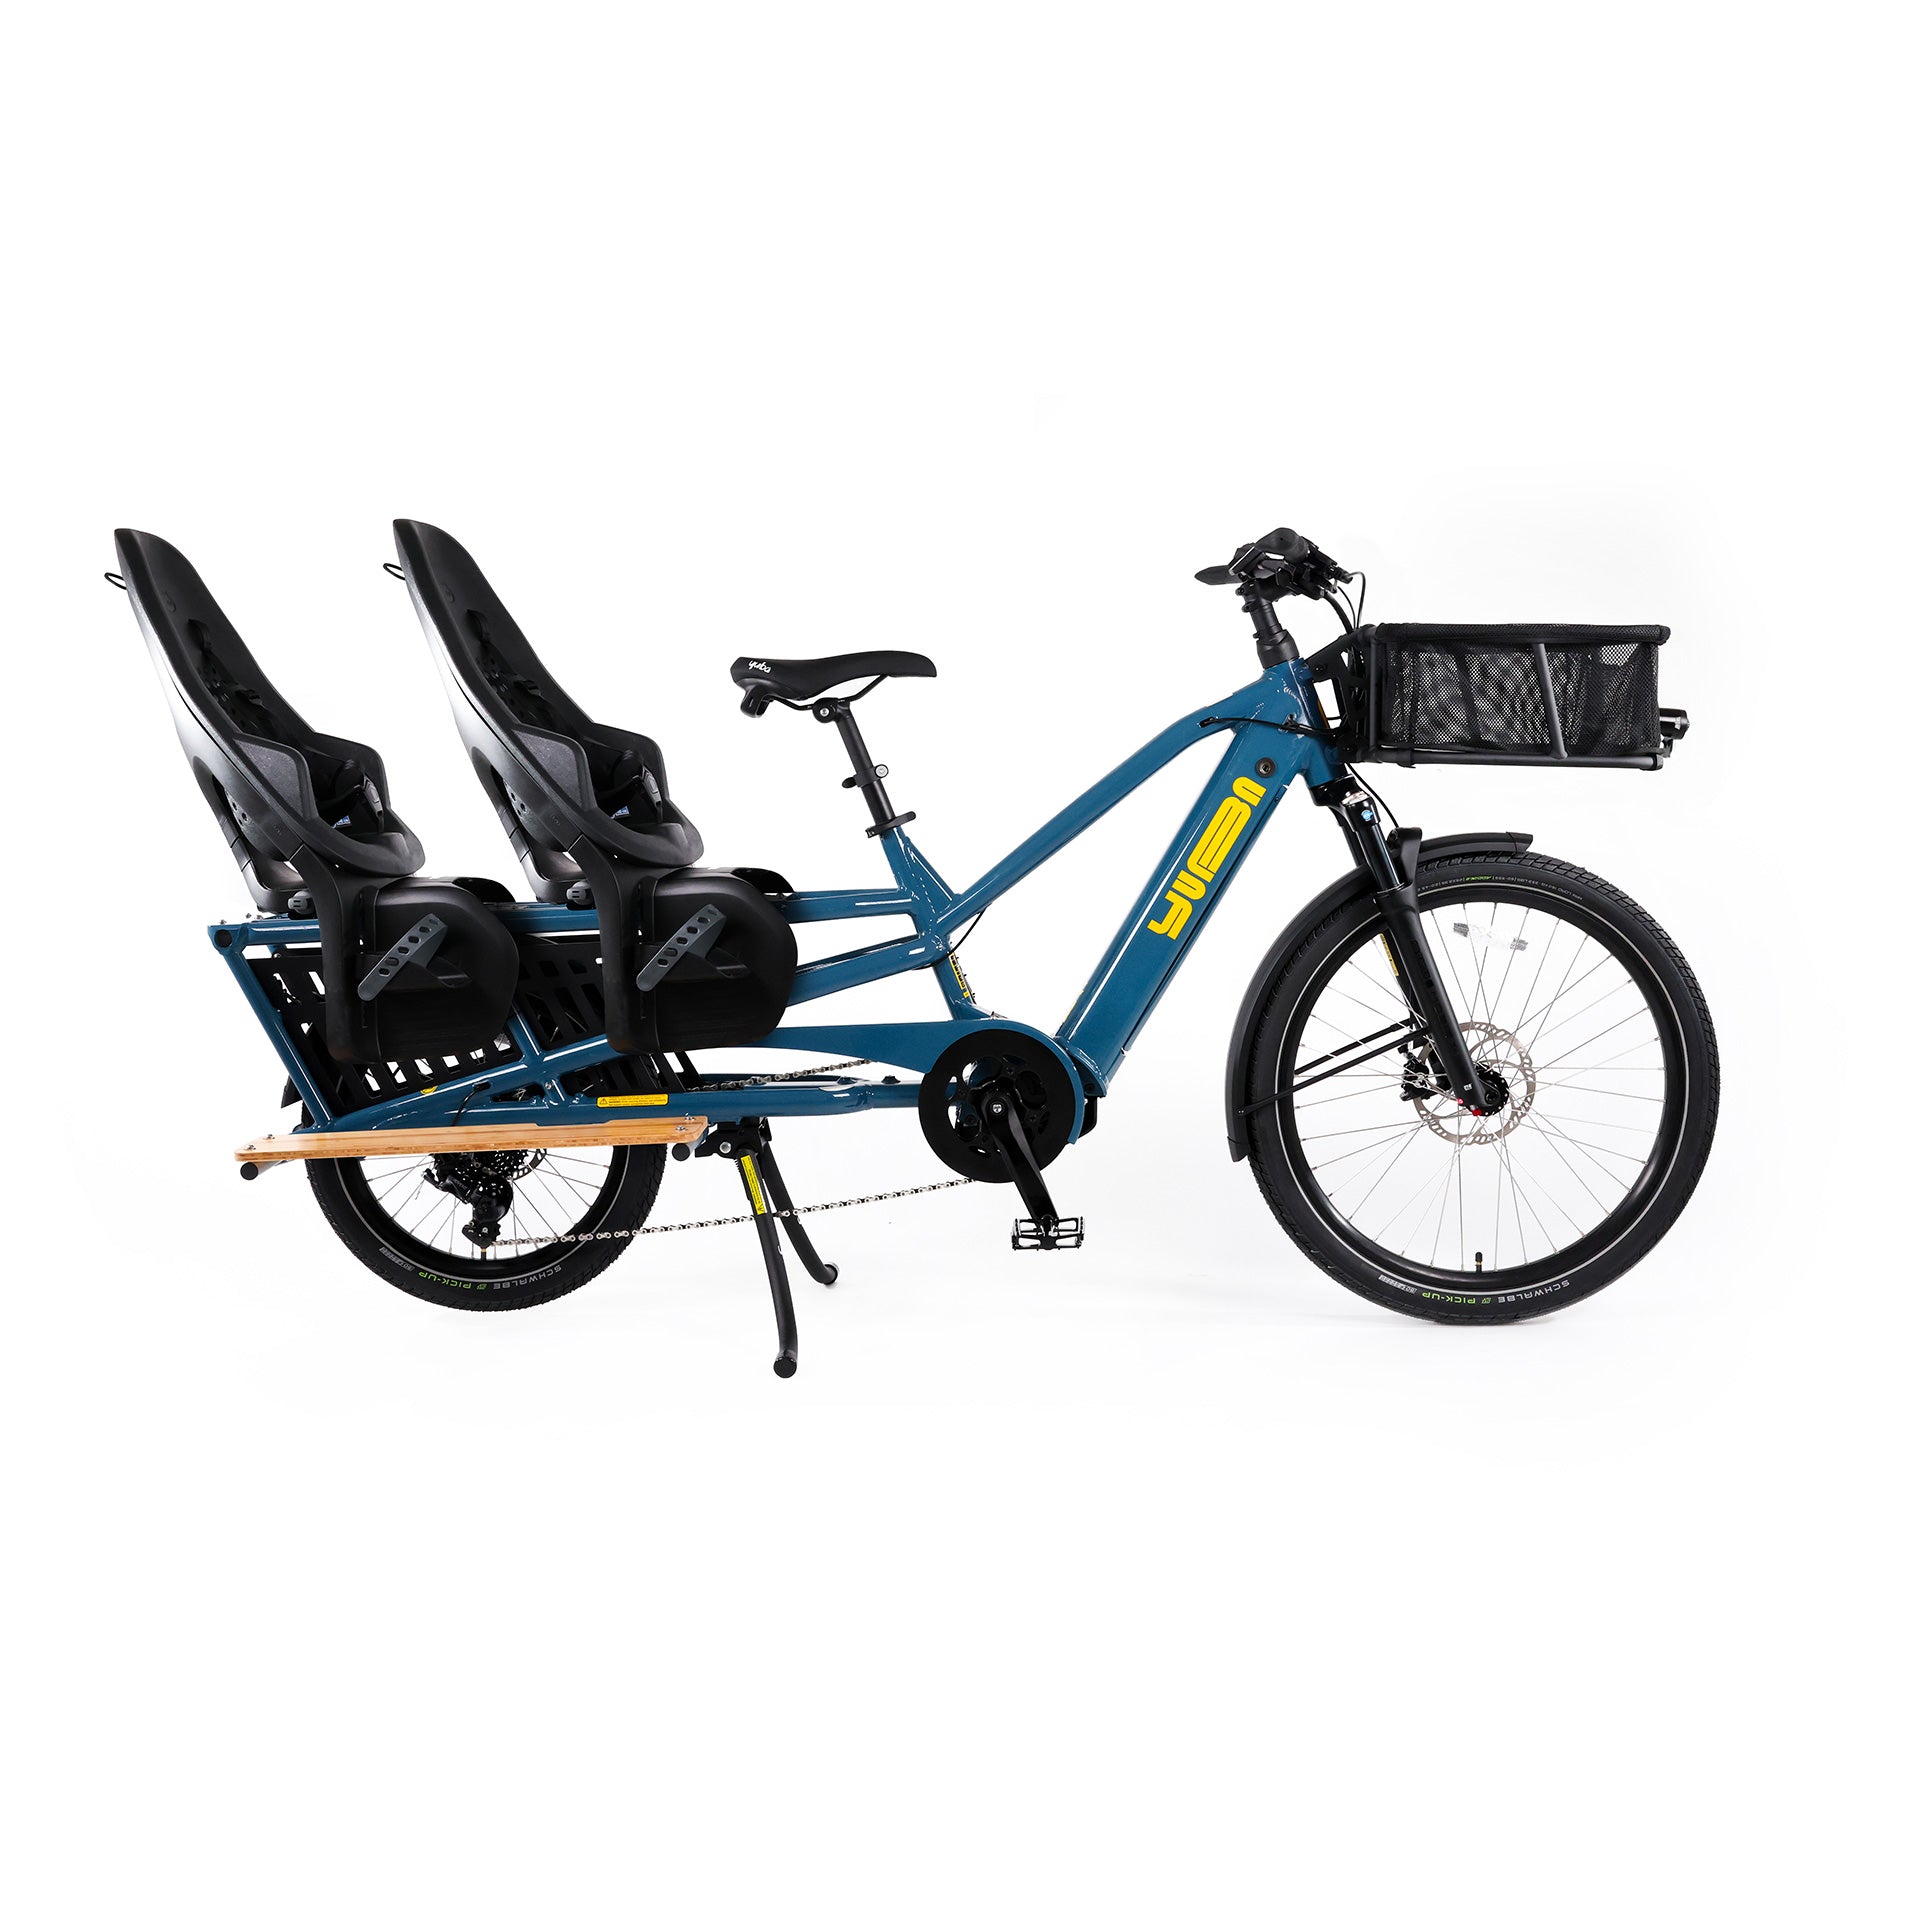 A product image of the Yuba Spicy Curry V4 electric longtail cargo bike. The frame colour is True Blue and the bike is set up with two rear child seat add-ons and a front bread basket.. 